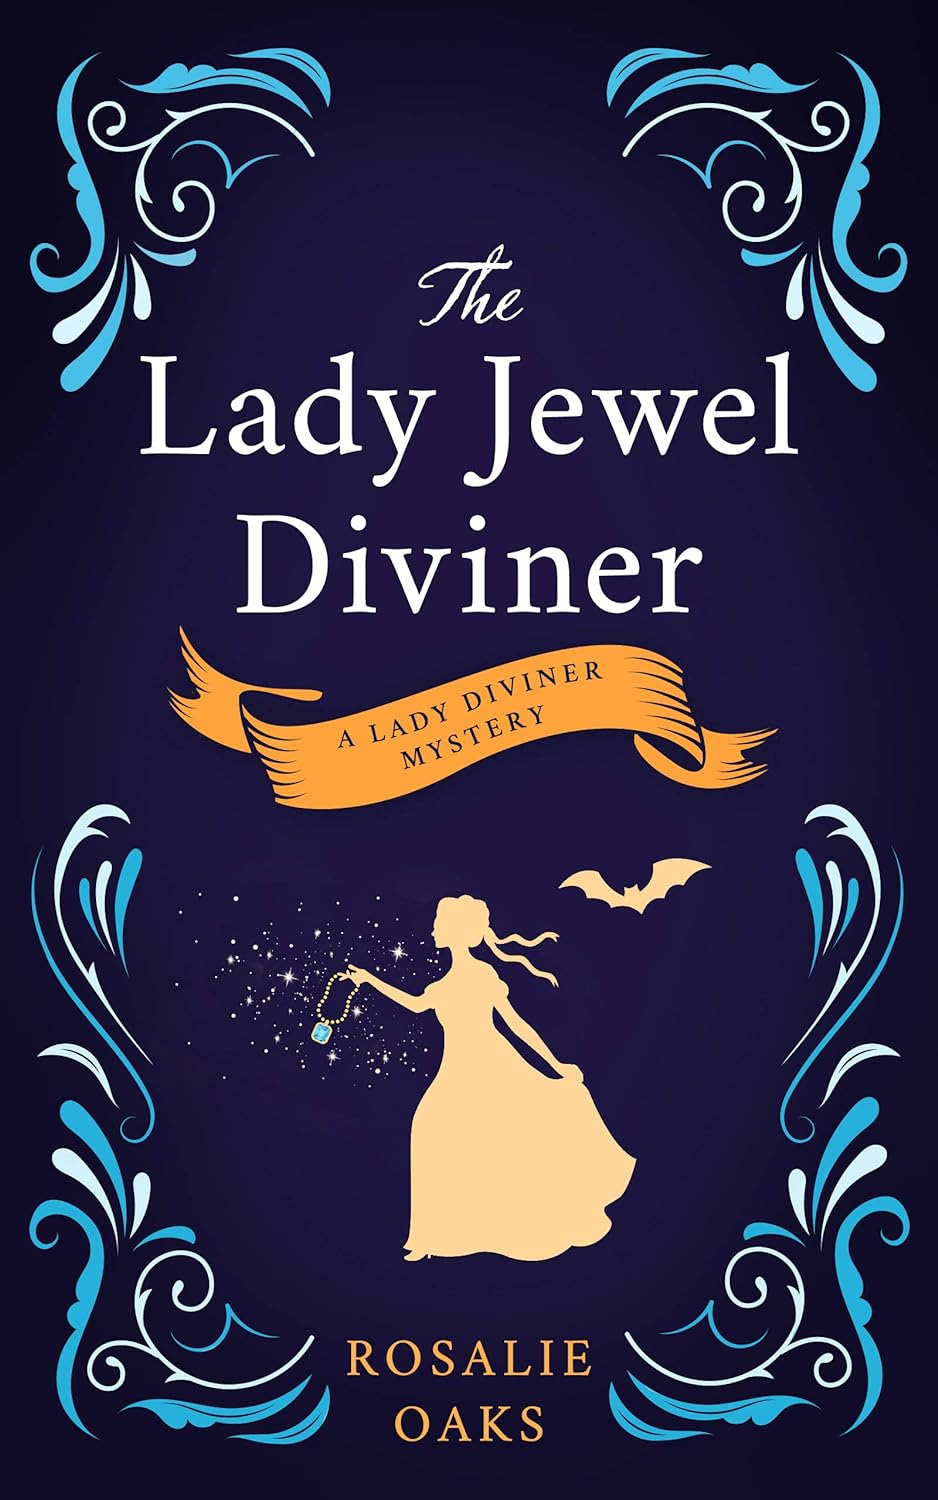 Book cover of The Lady Jewel Diviner by Rosalie Oaks, dark blue background with the silhouette of a young woman in a long dress holding a necklace, with a bat flying next to her